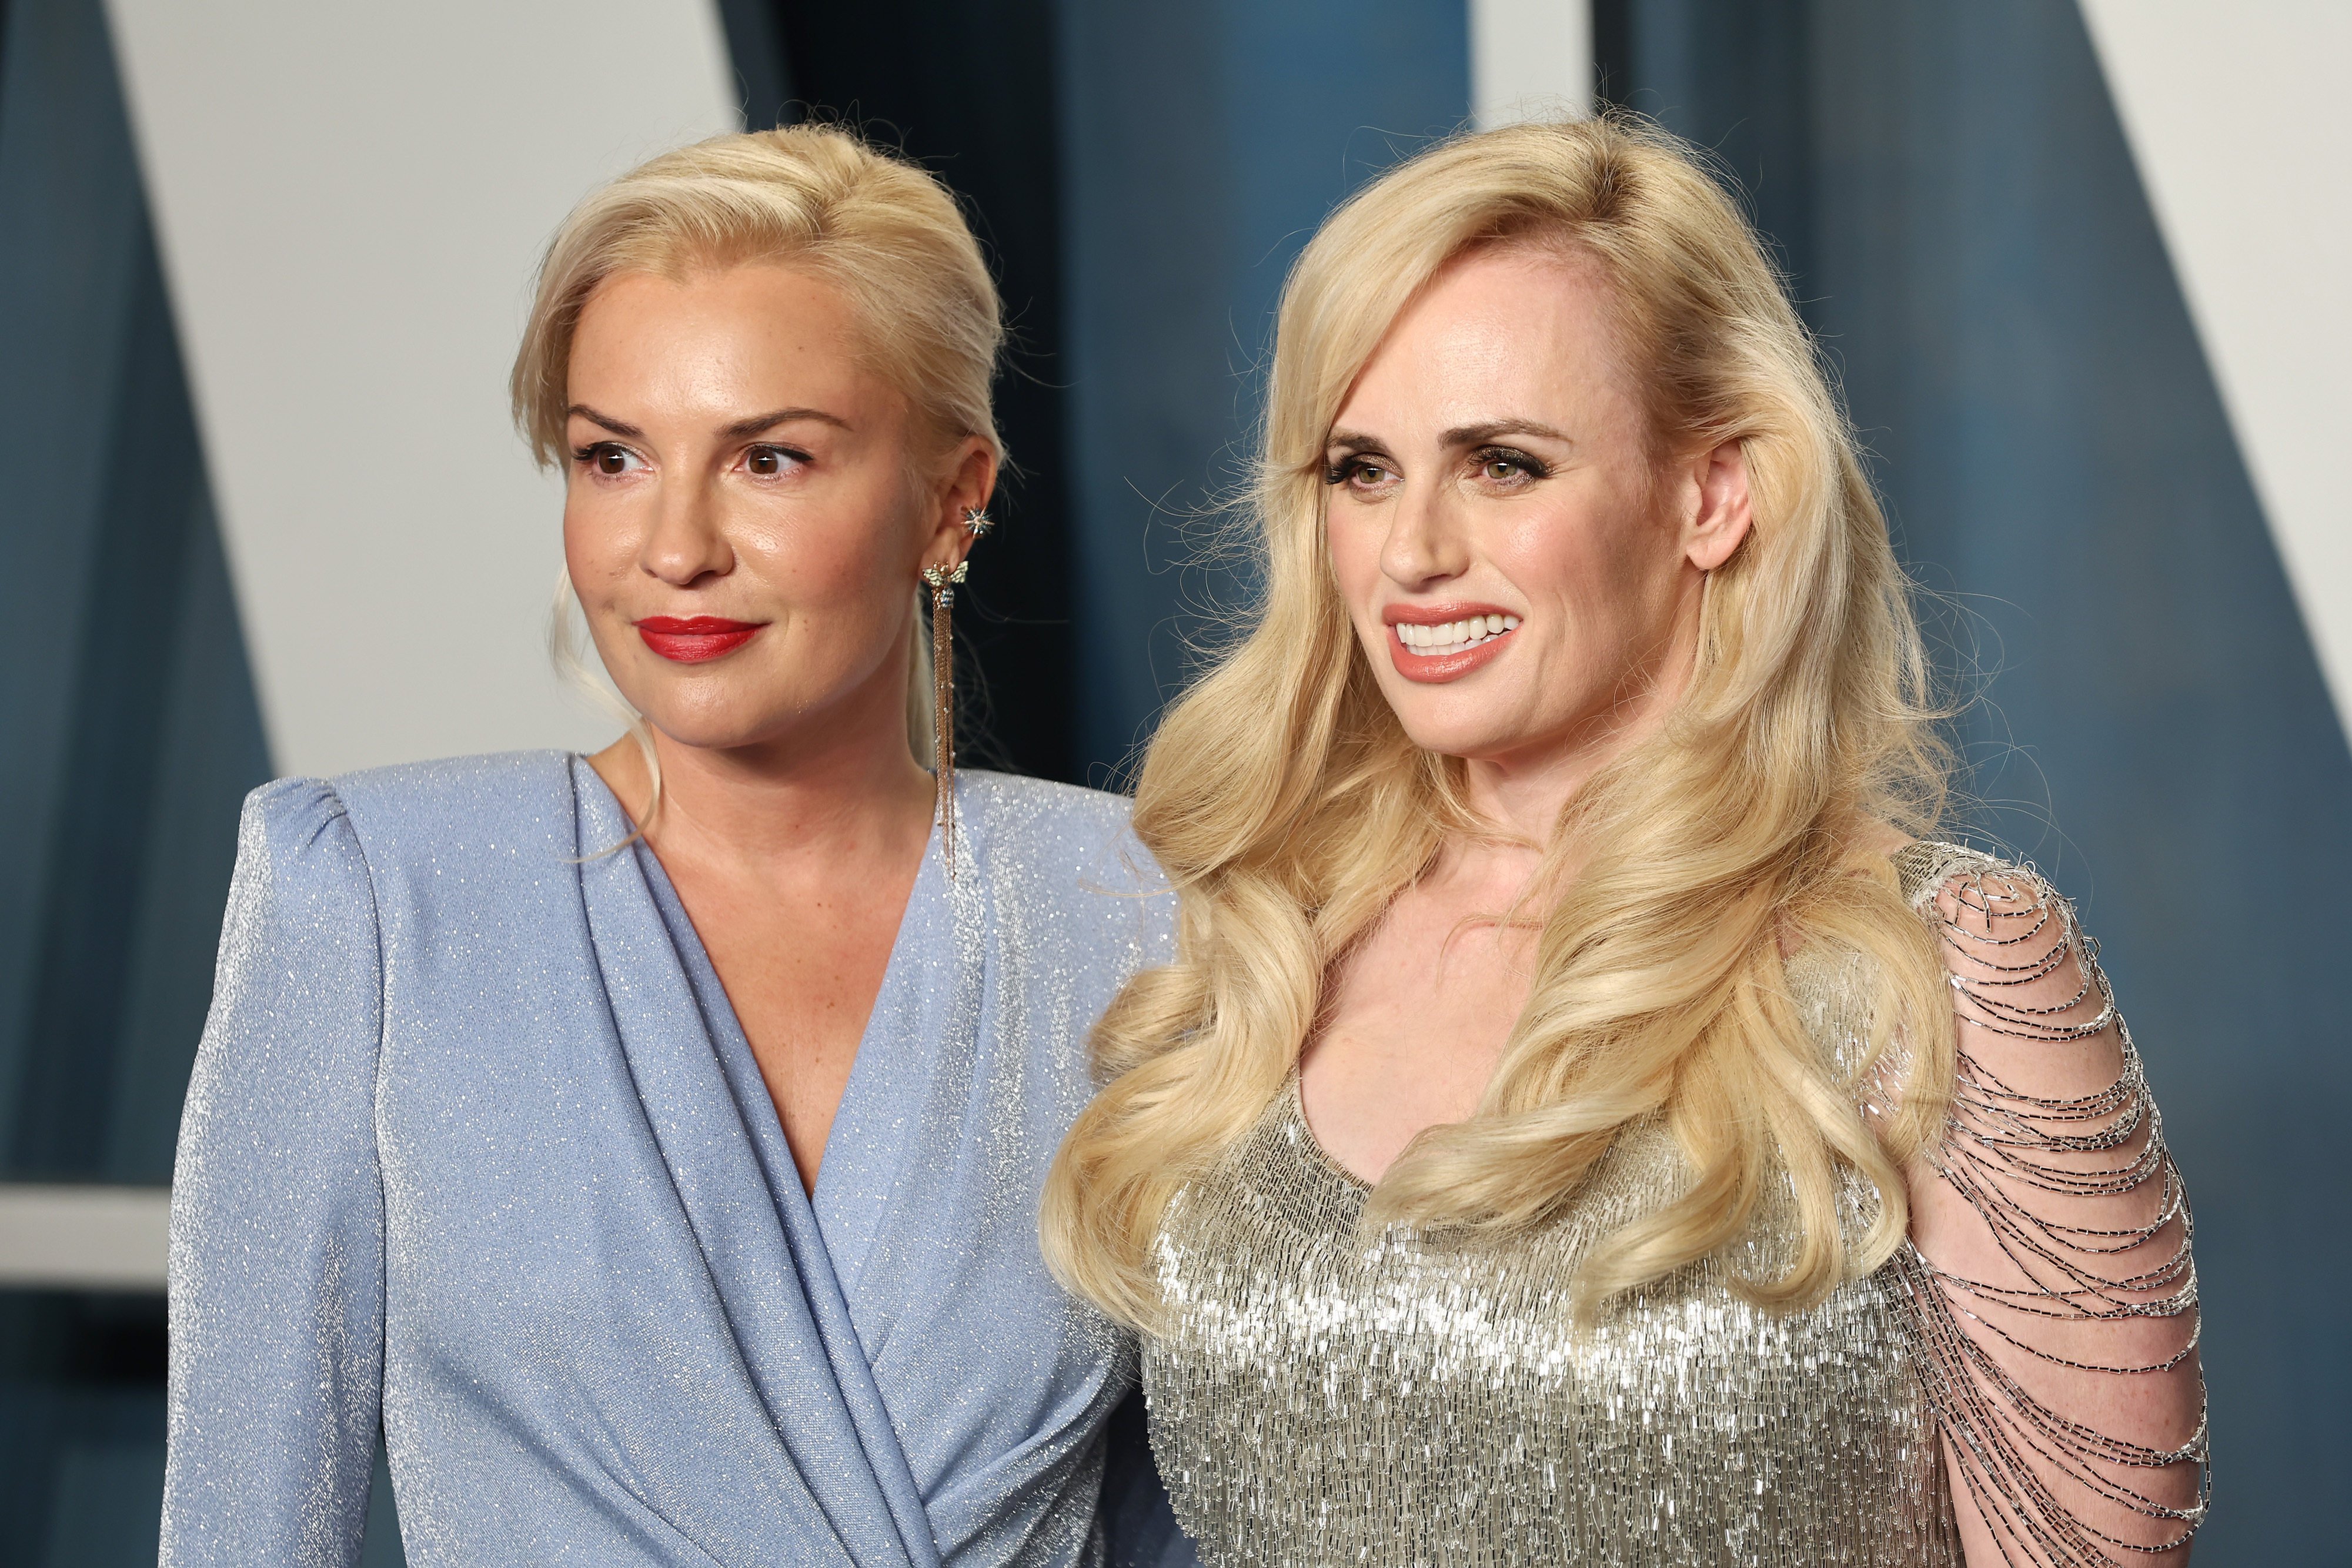 Rebel Wilson (right) and Ramona Agruma attend the 2022 Vanity Fair Oscar Party hosted by Radhika Jones at Wallis Annenberg Center for the Performing Arts, on March 27, in Beverly Hills, California. Photo: FilmMagic